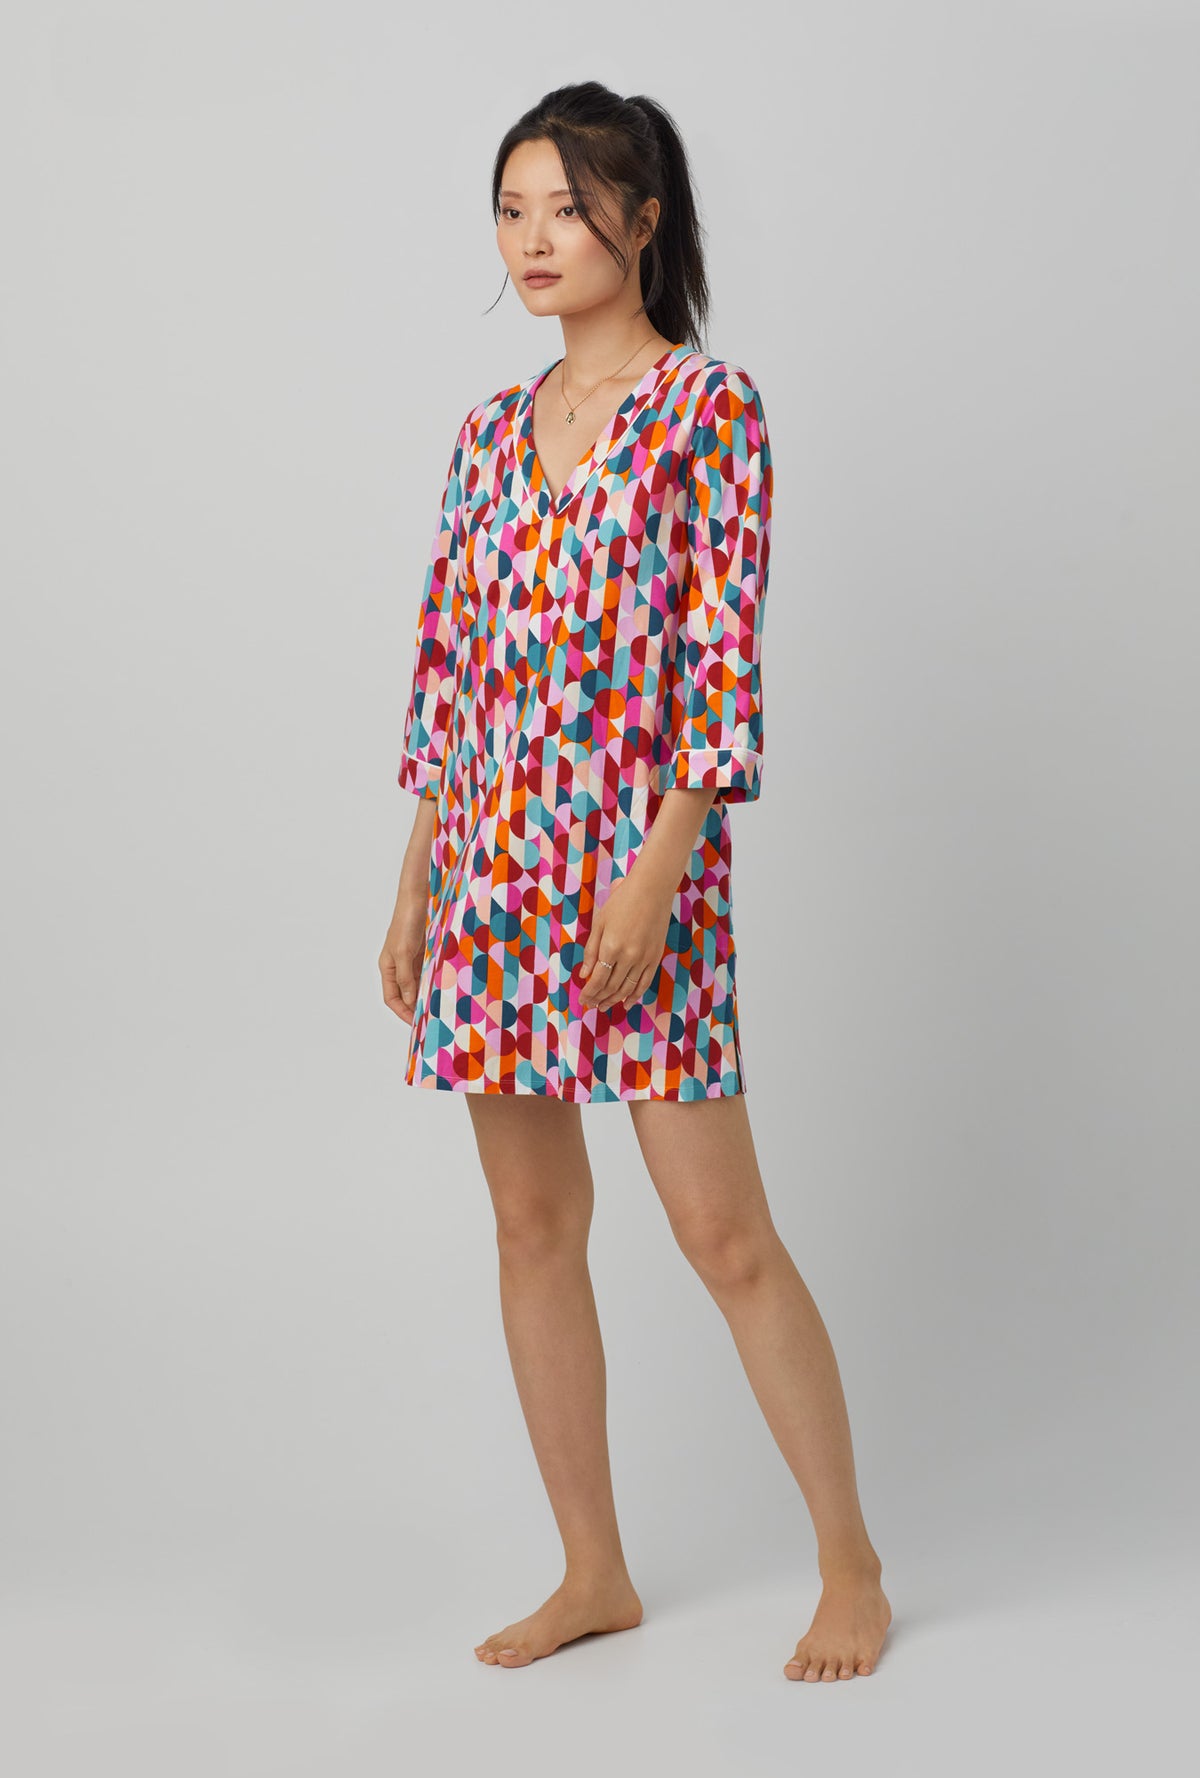 A lady wearing 3/4 Sleeve Stretch Jersey Sleepshirt with dancing dots print